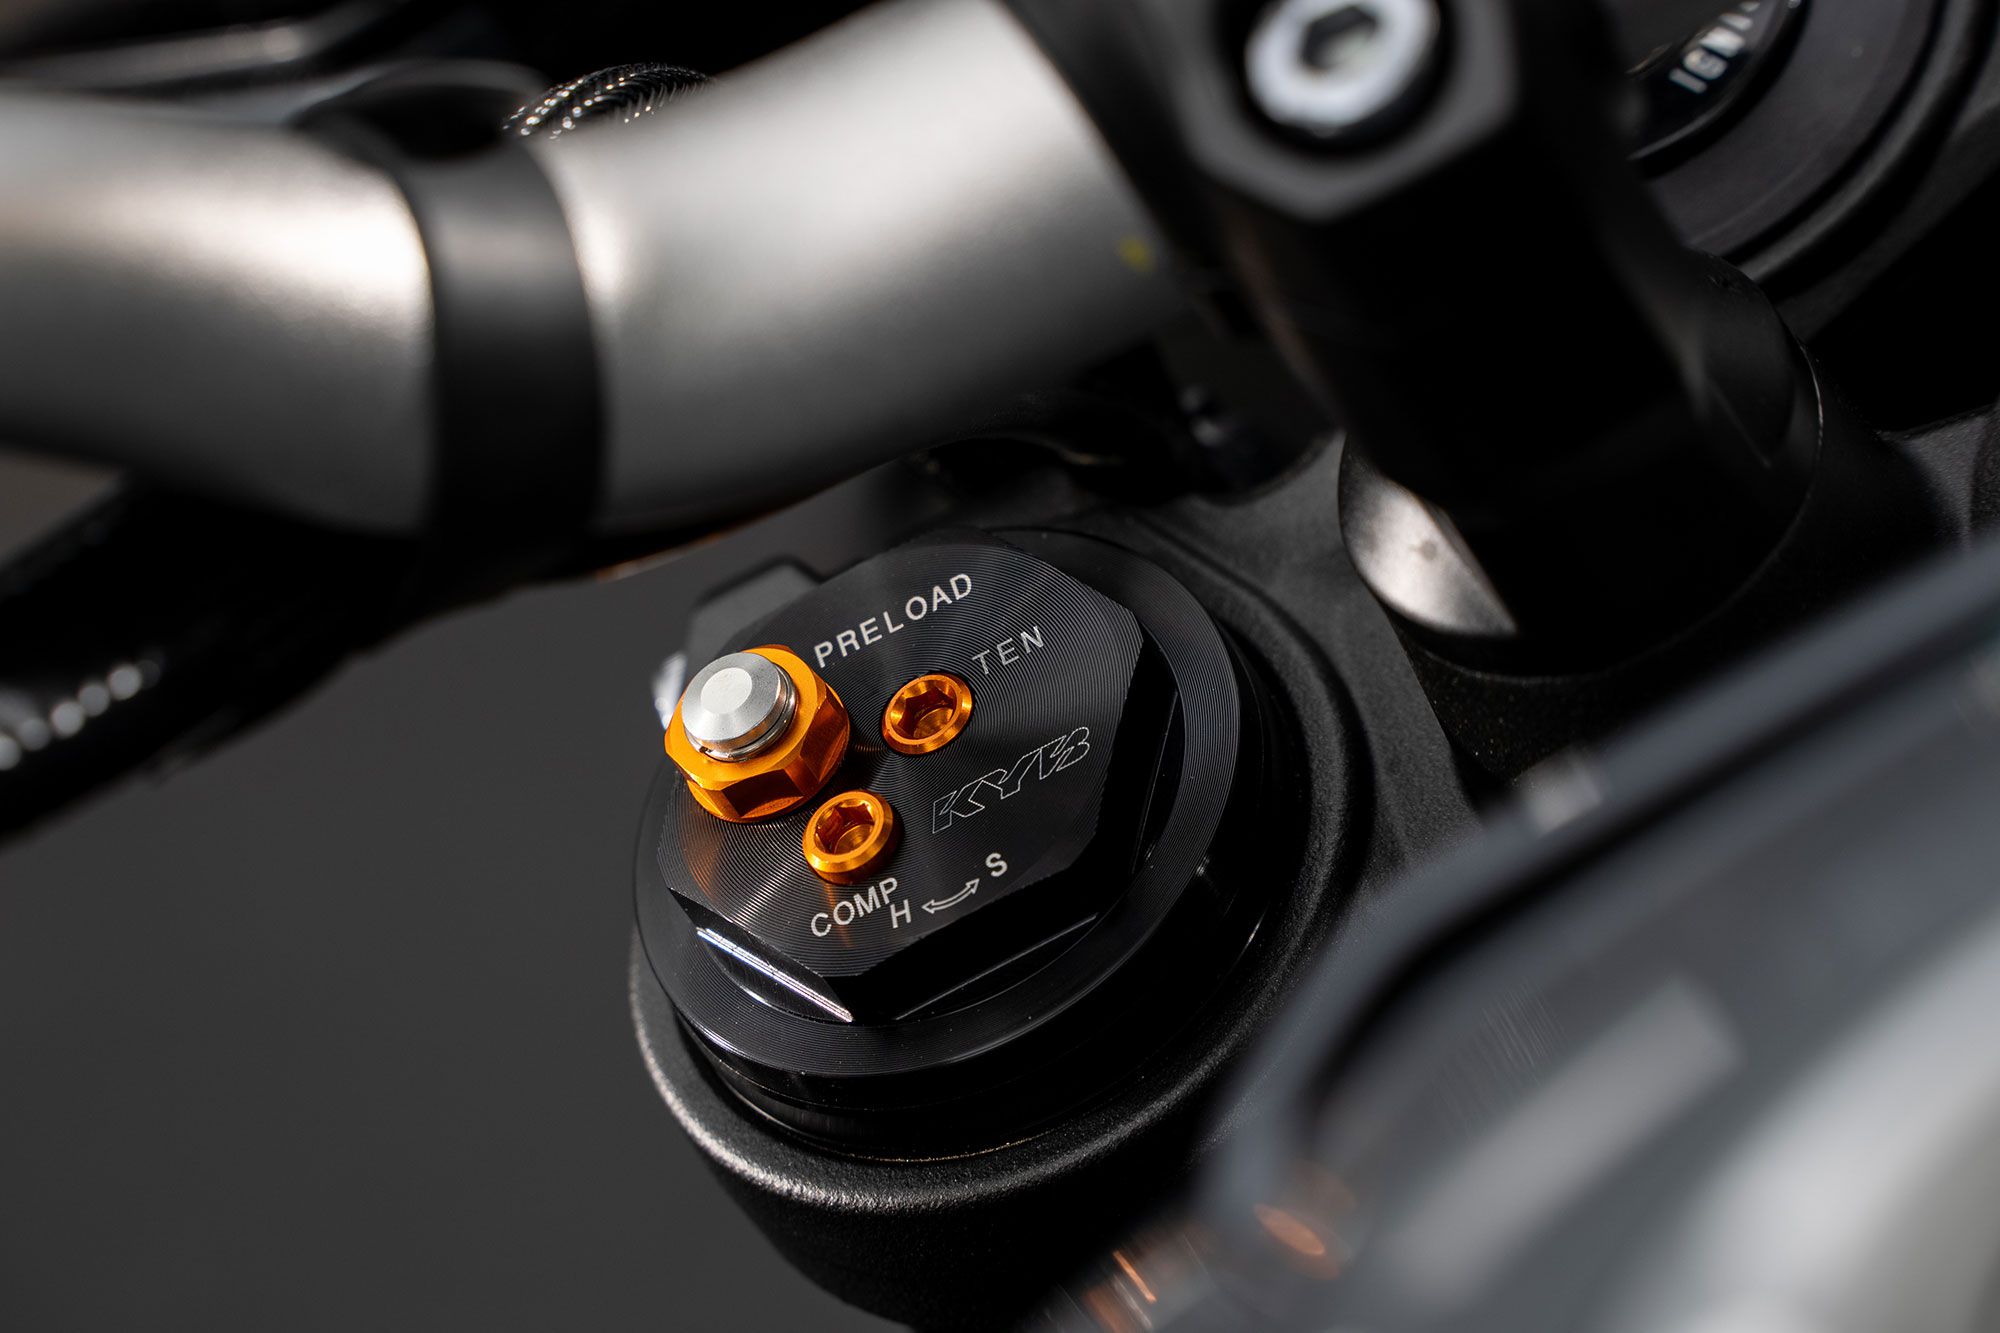 The MT-10 offers more robust suspension components than the rest of the MT family. This boosts road holding at speed.